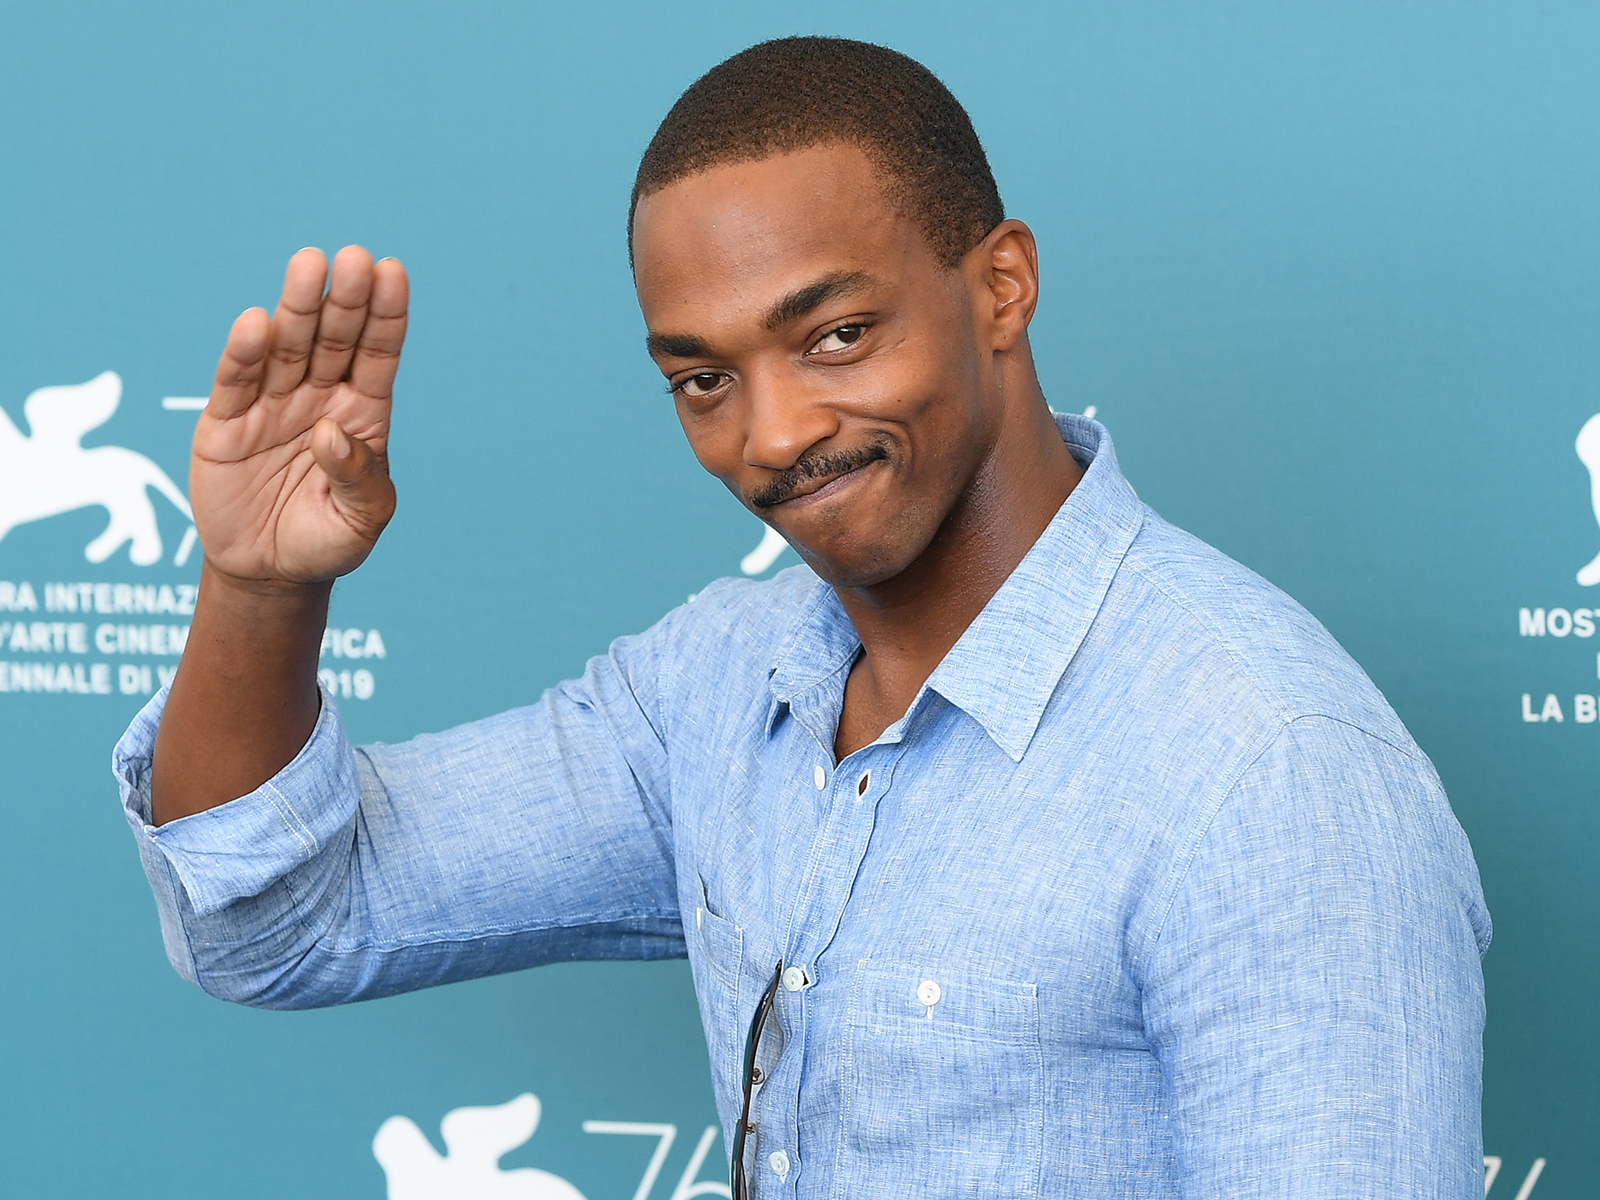 04-anthony-mackie-gettyimages-1171130859.jpg